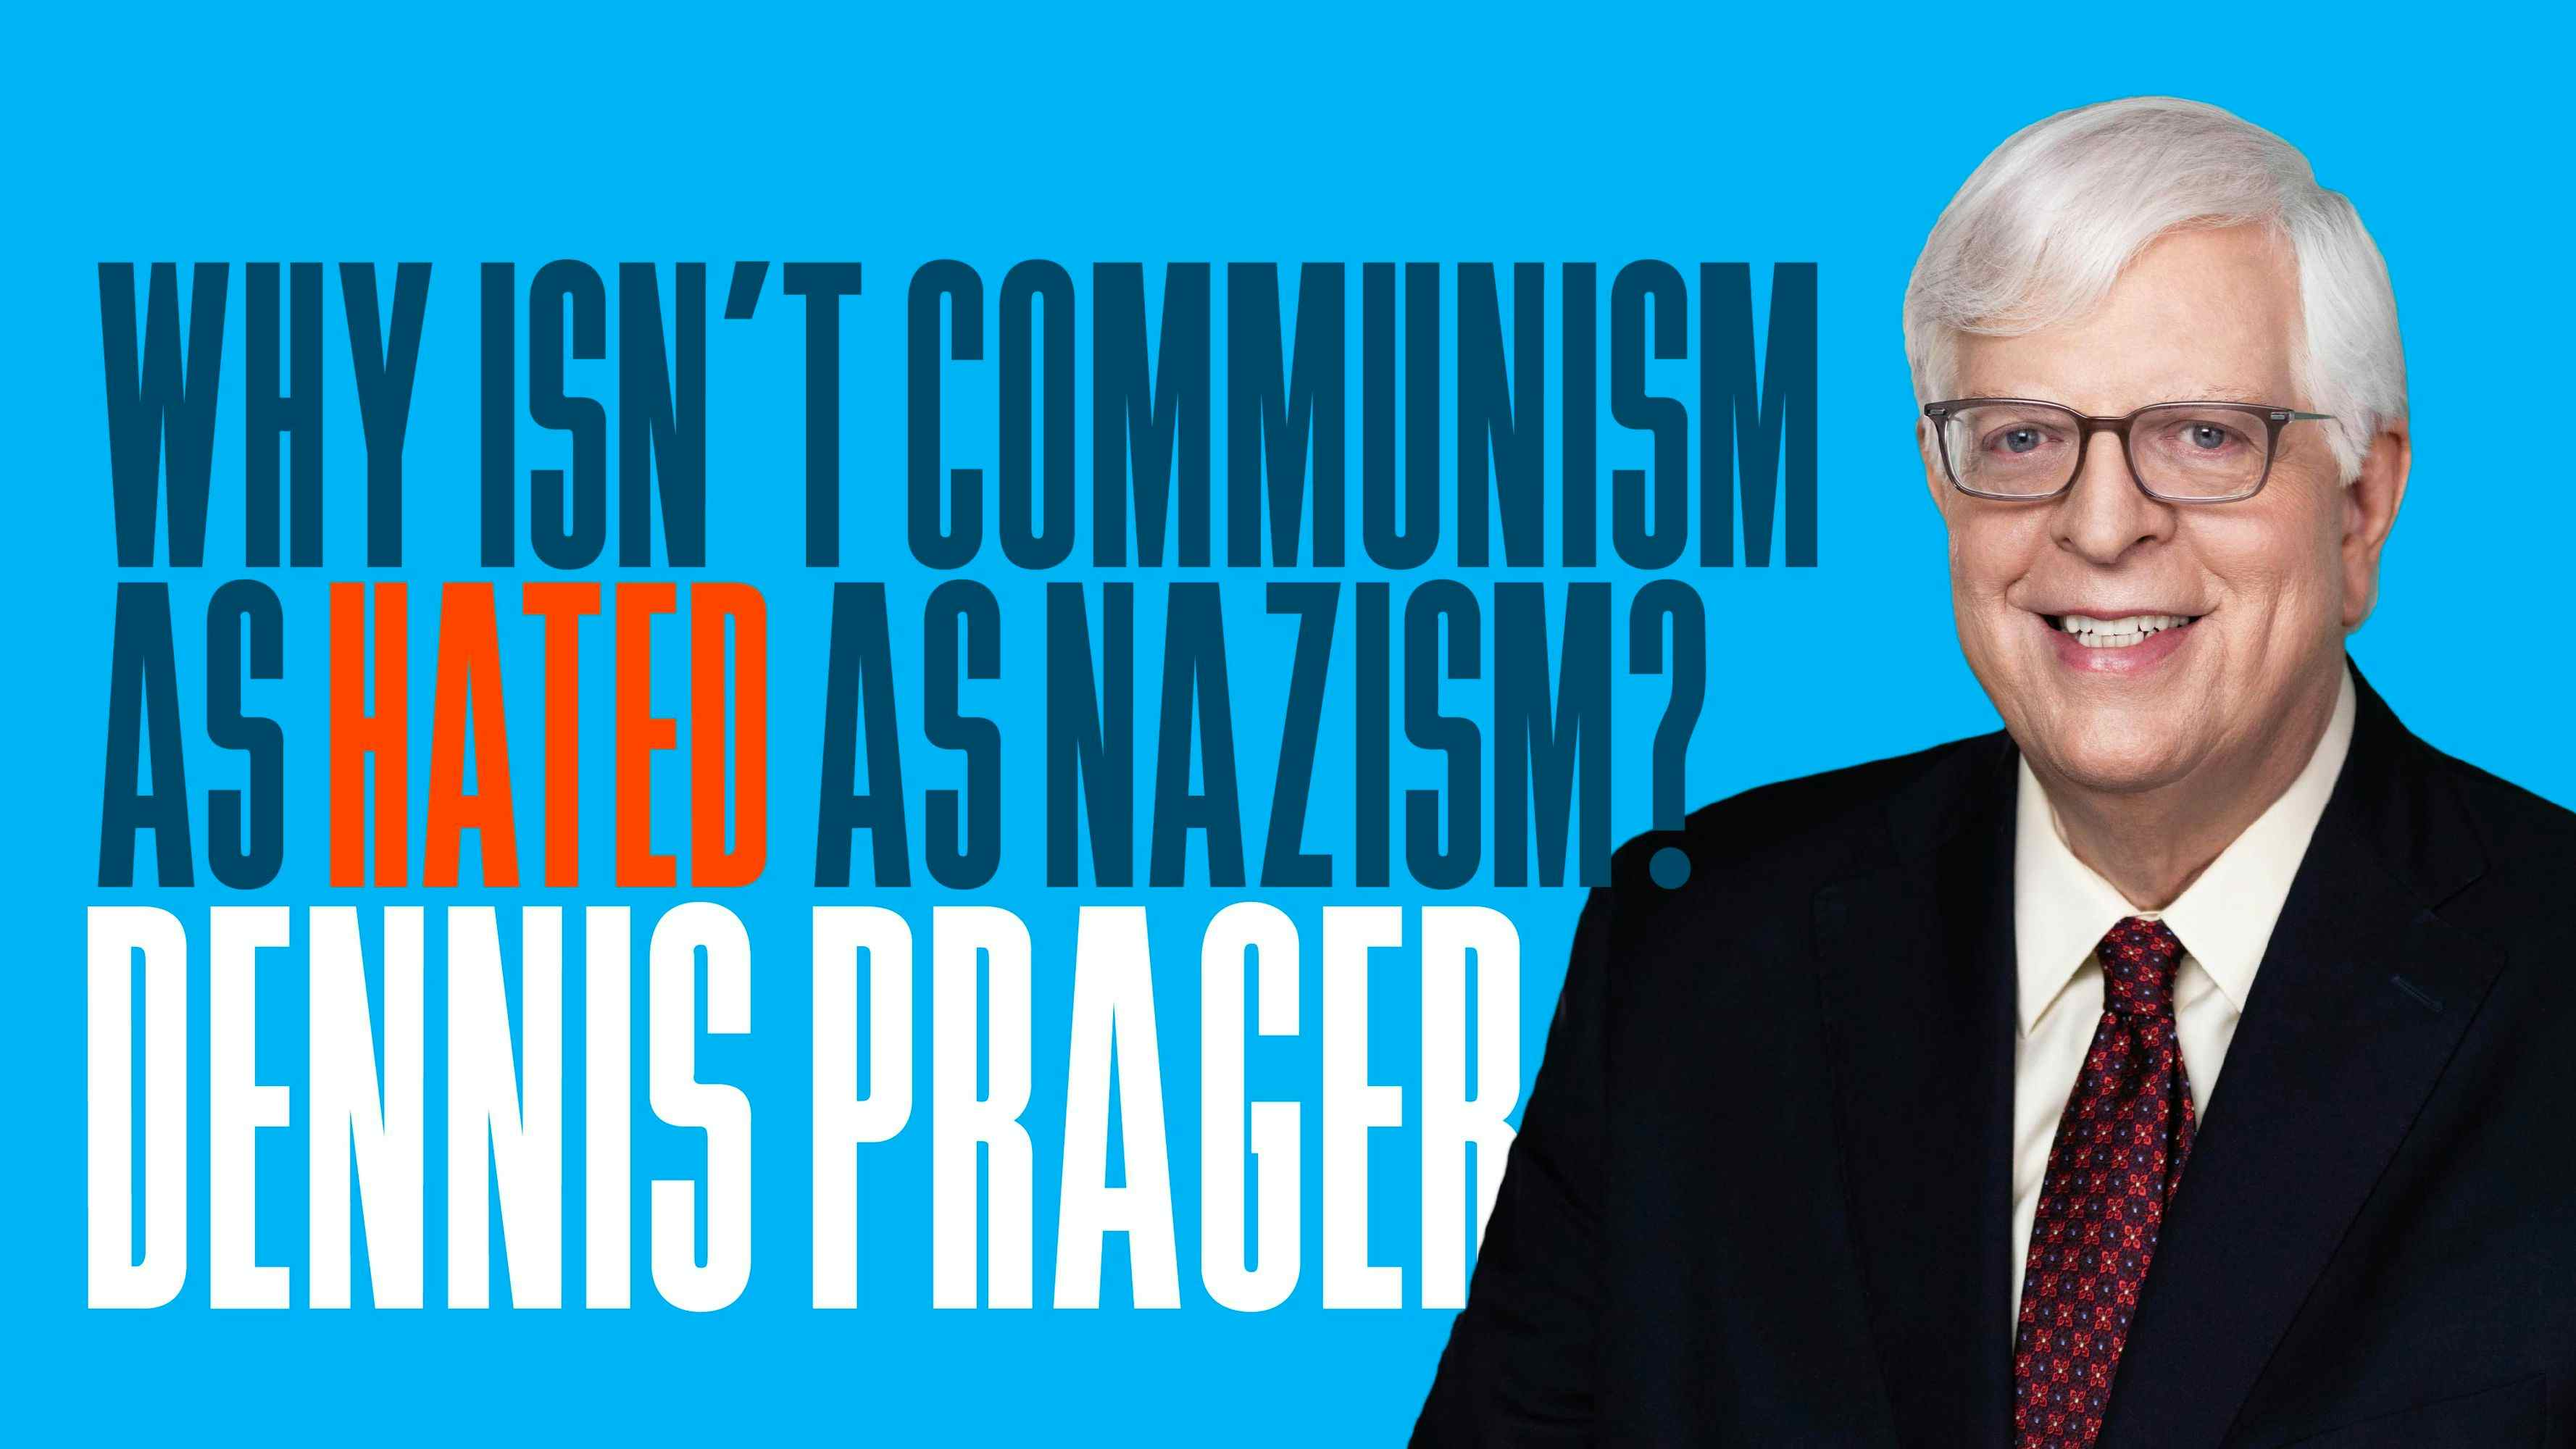 Why Isn't Communism as Hated as Nazism?